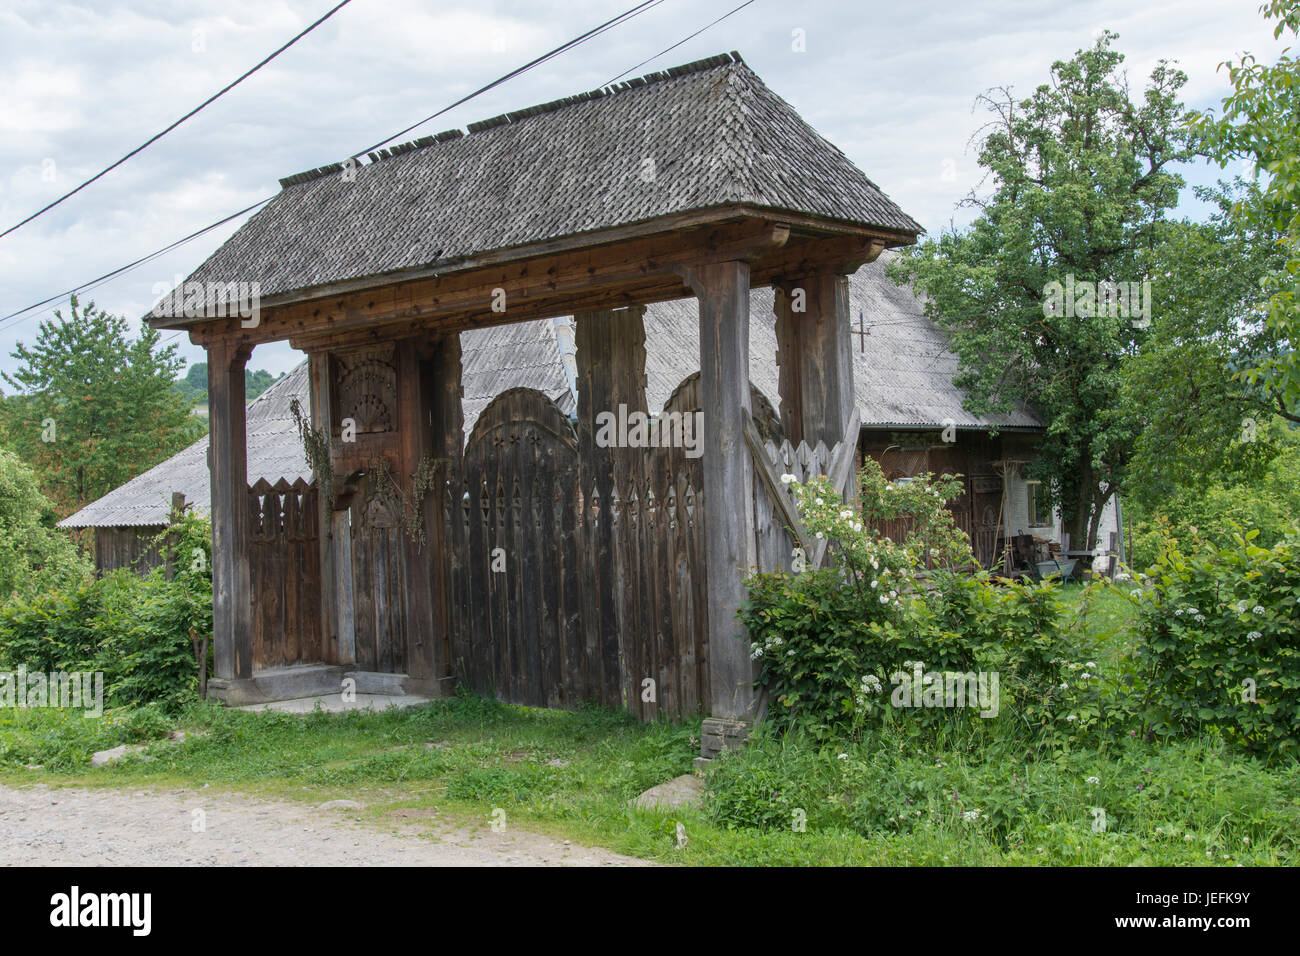 Typical wooden decorated house gate in Maramures region Stock Photo